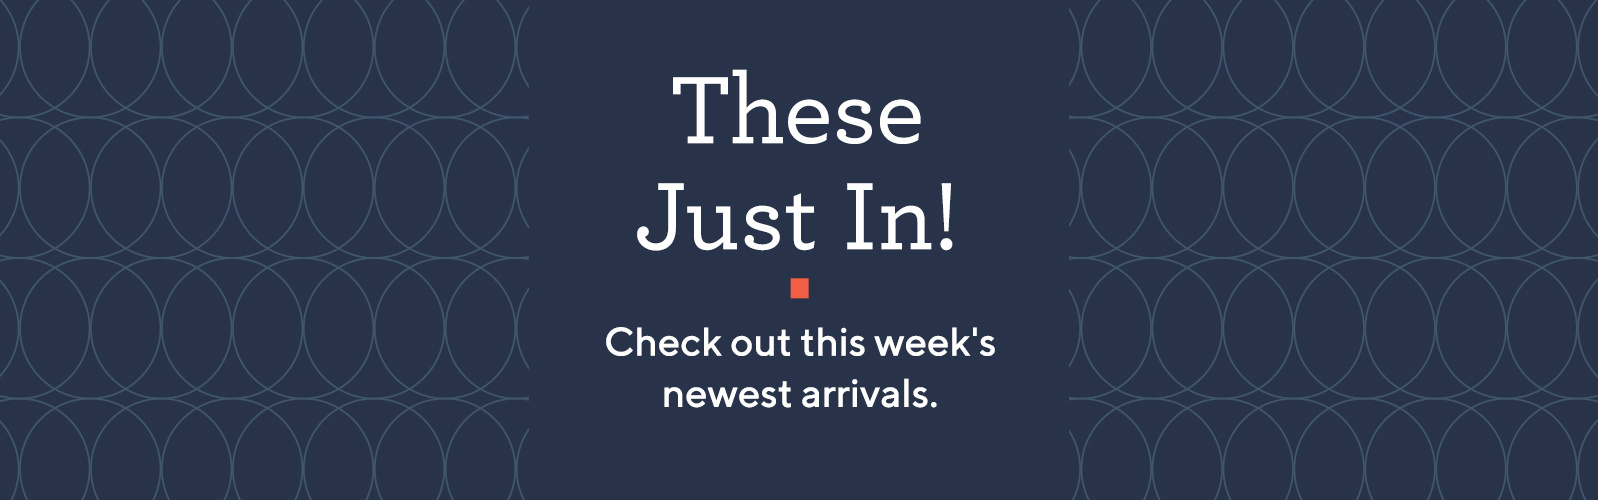 These Just In!  Check out this week's newest arrivals.